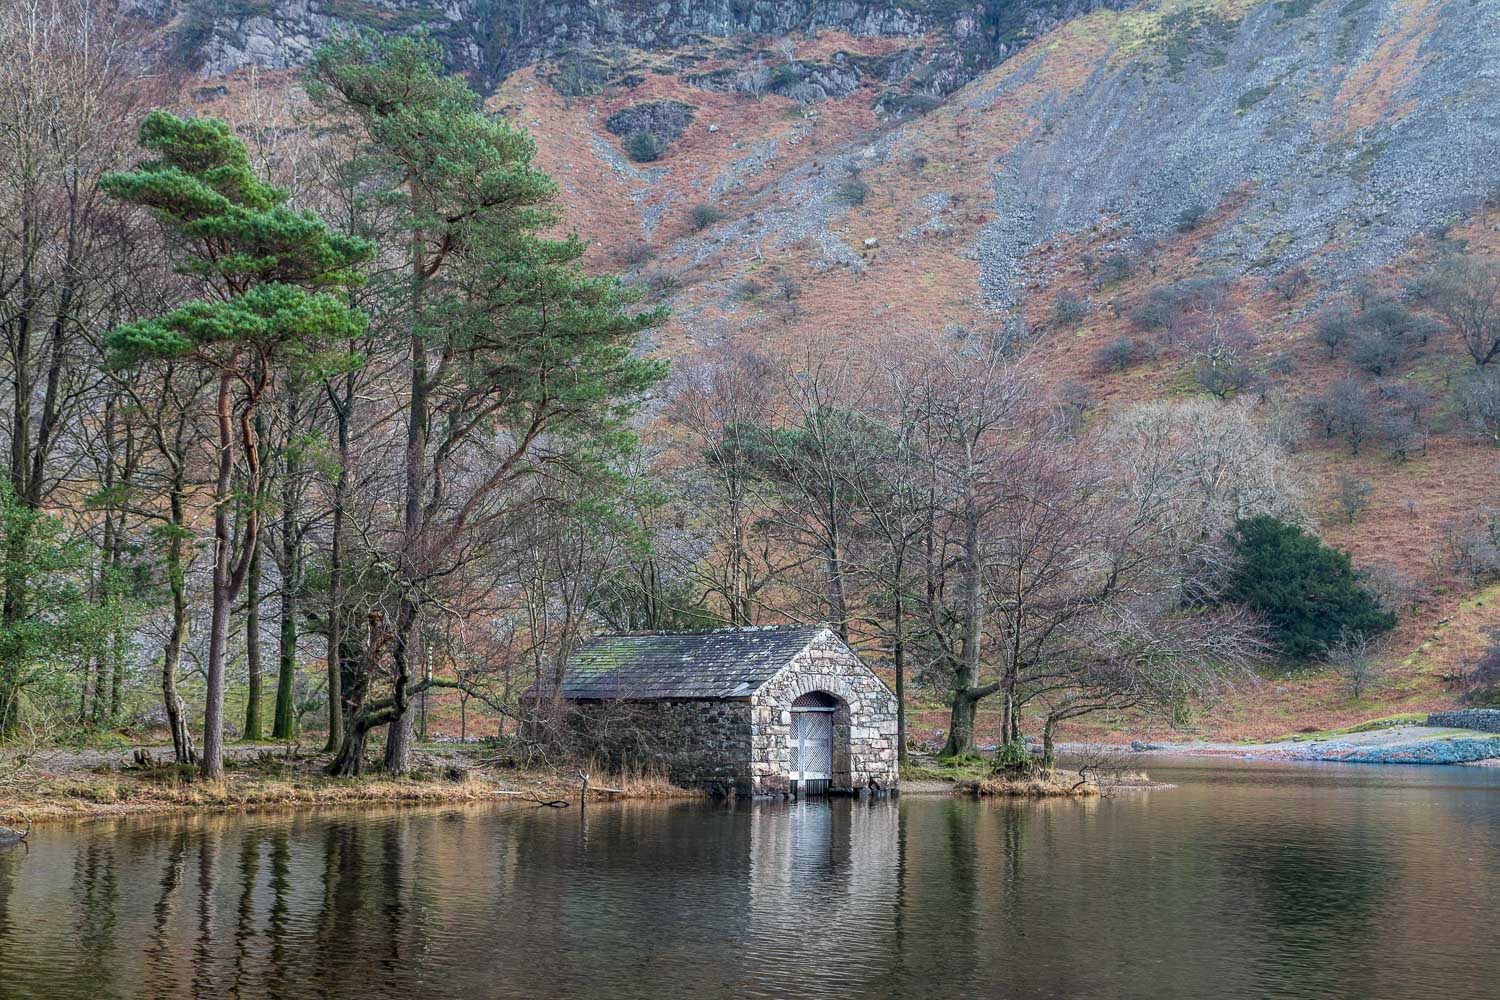 Boathouse Wast Water